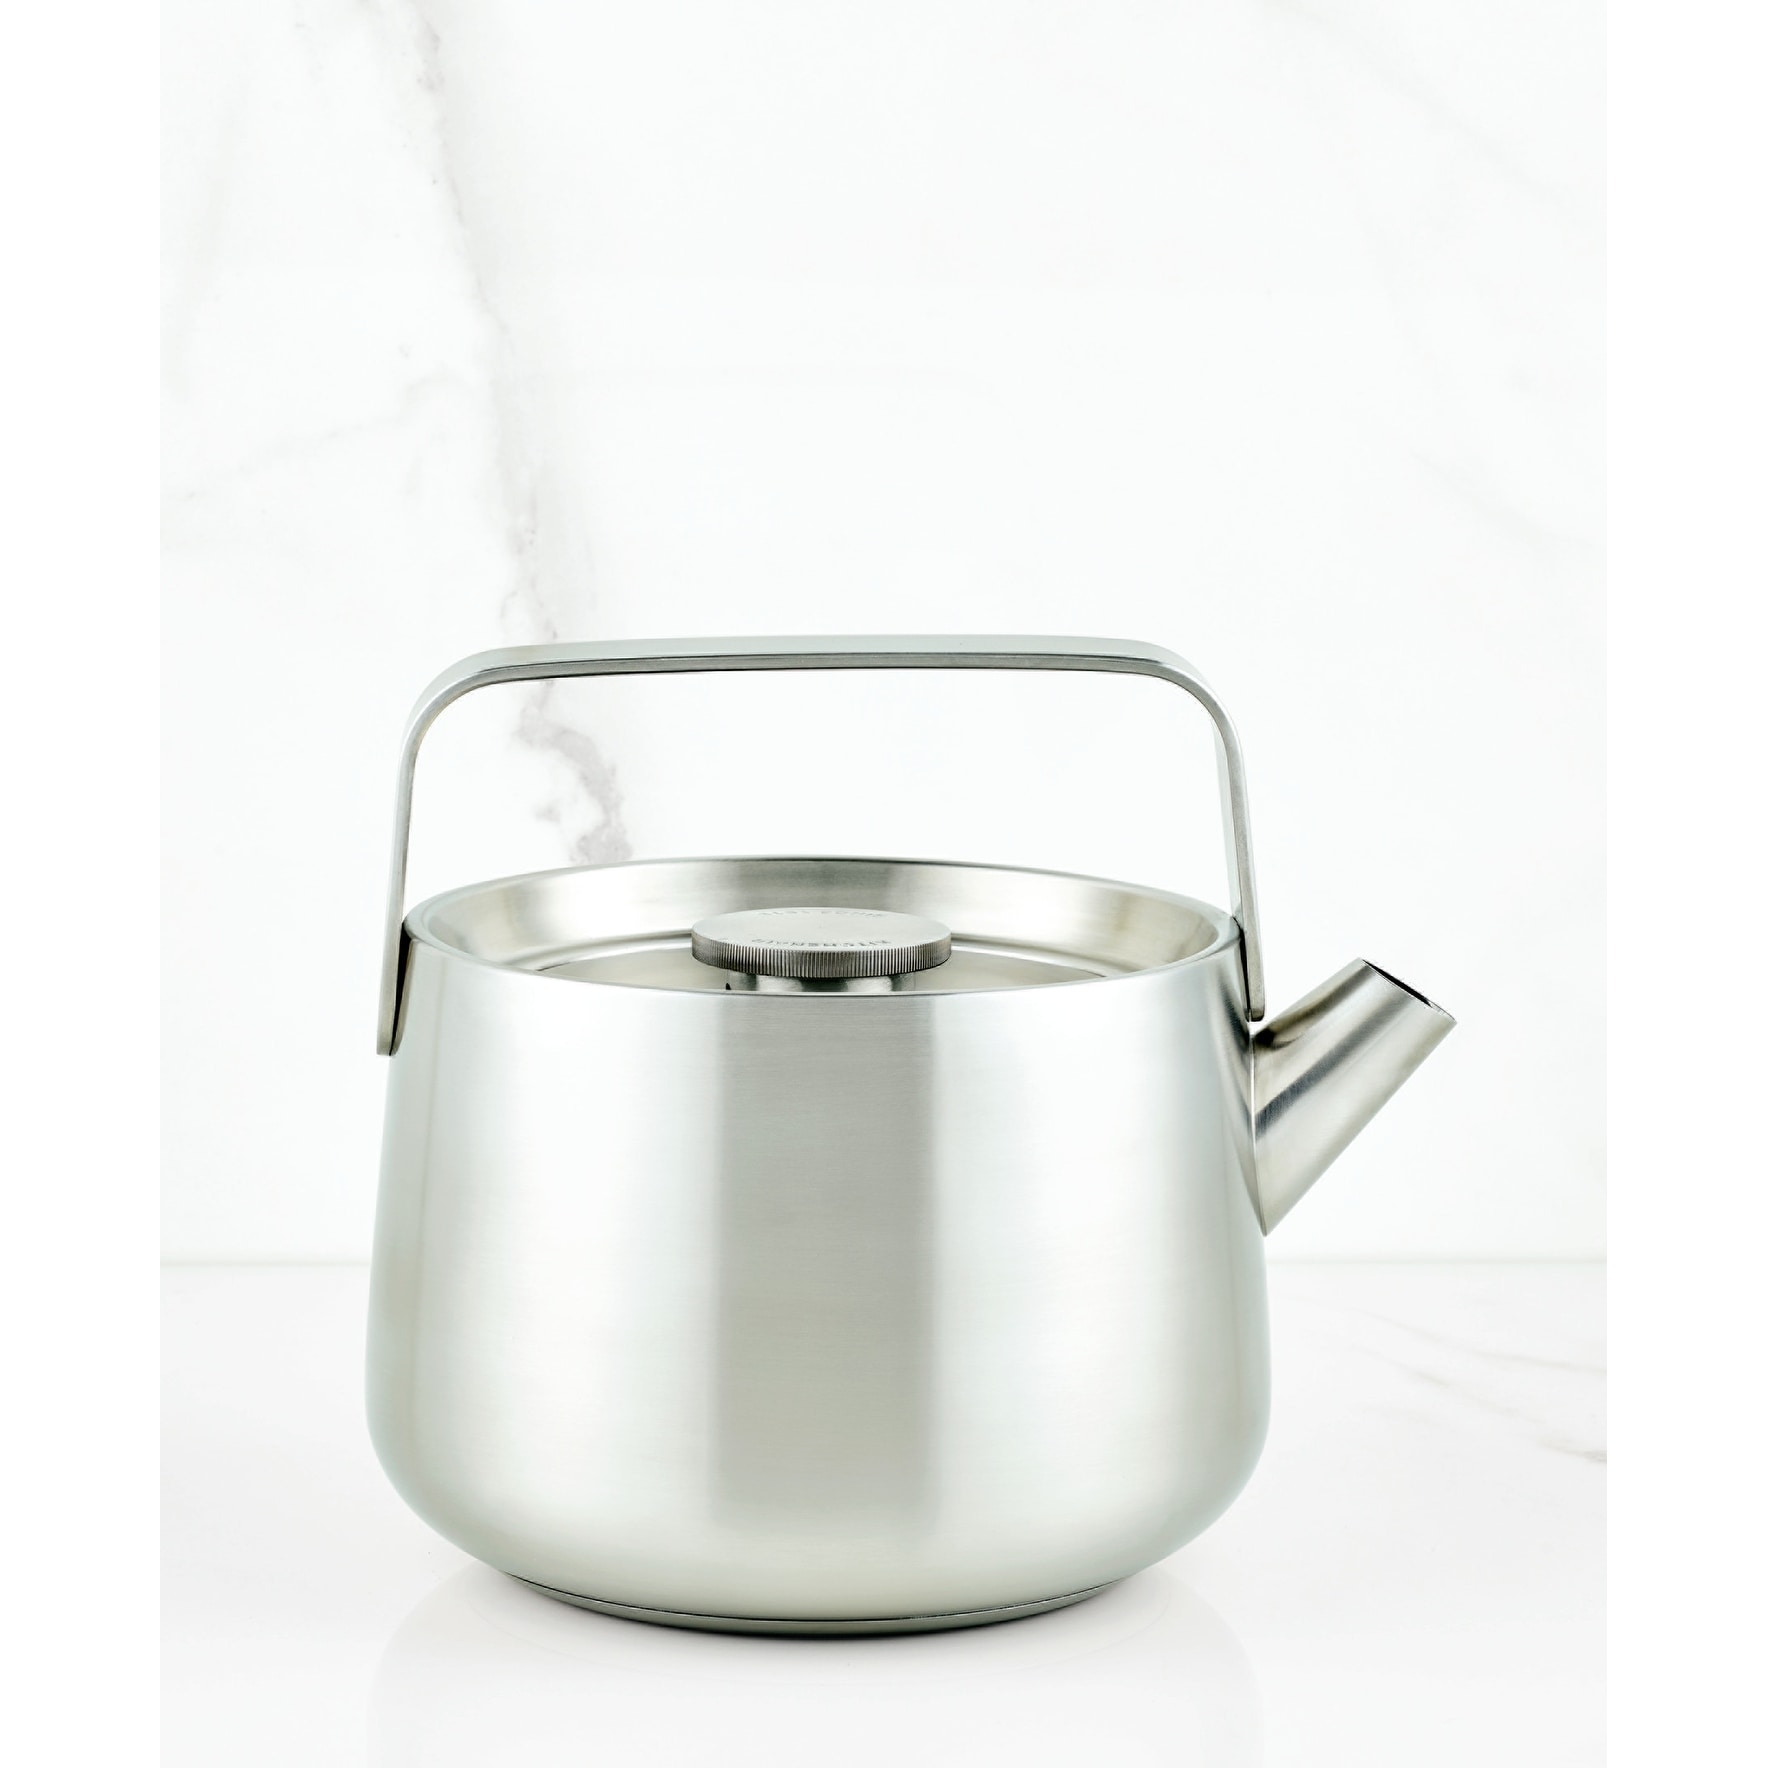 Stainless Steel Tea Kettle Induction Cooktop Modern Kitchen Stock